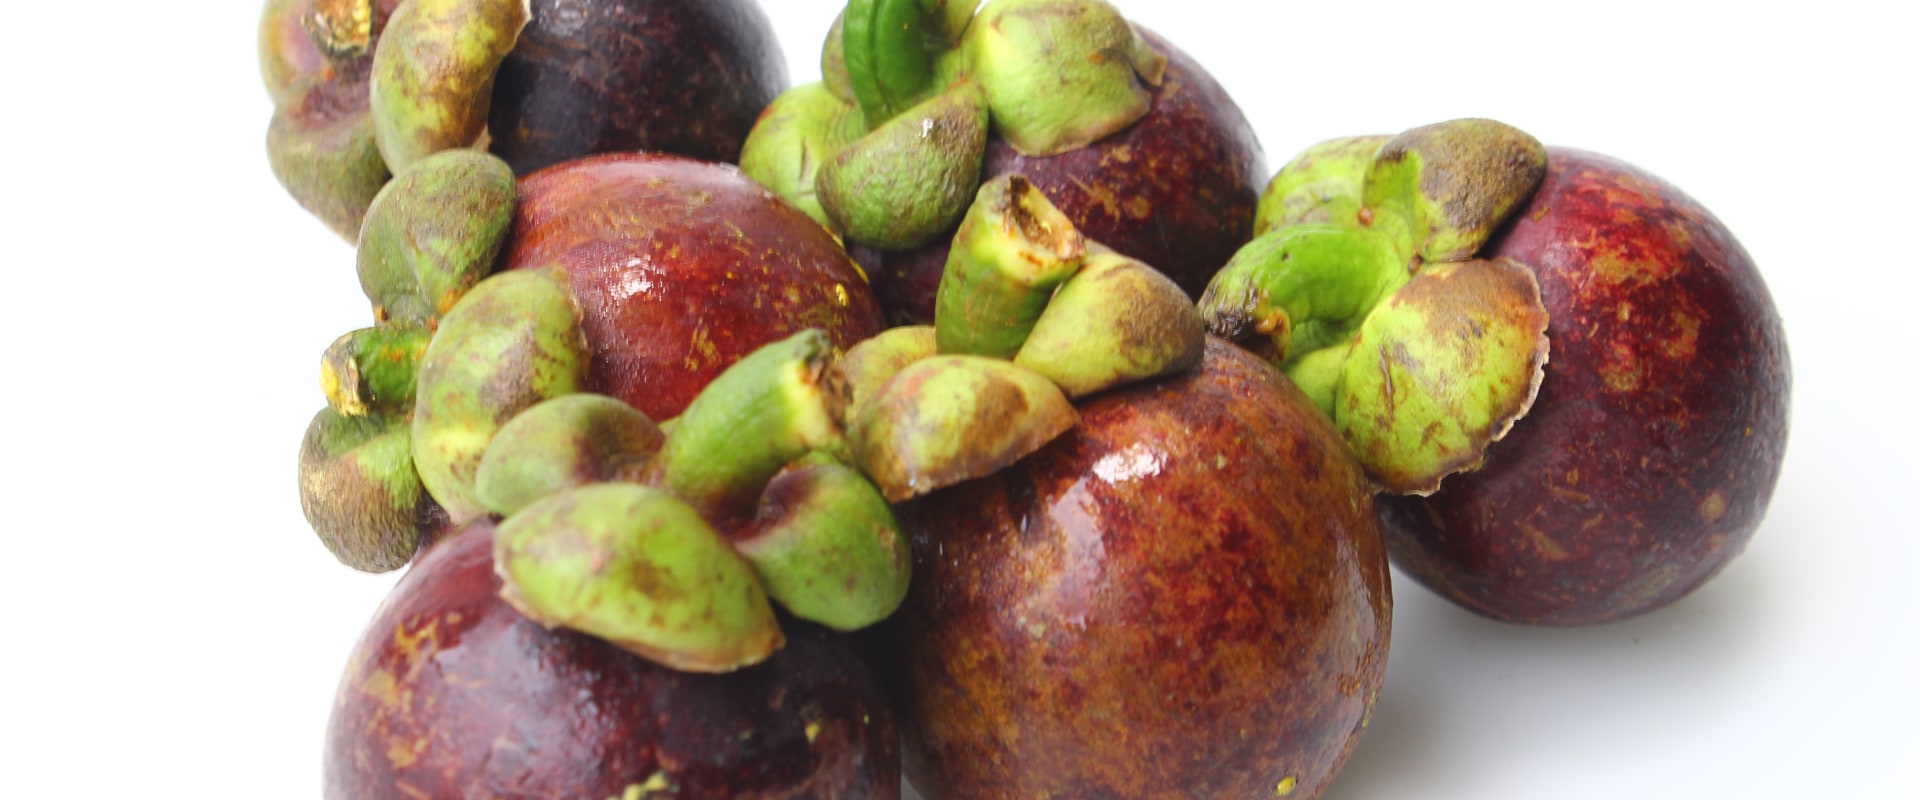 Can i boil mangosteen skin and drink?